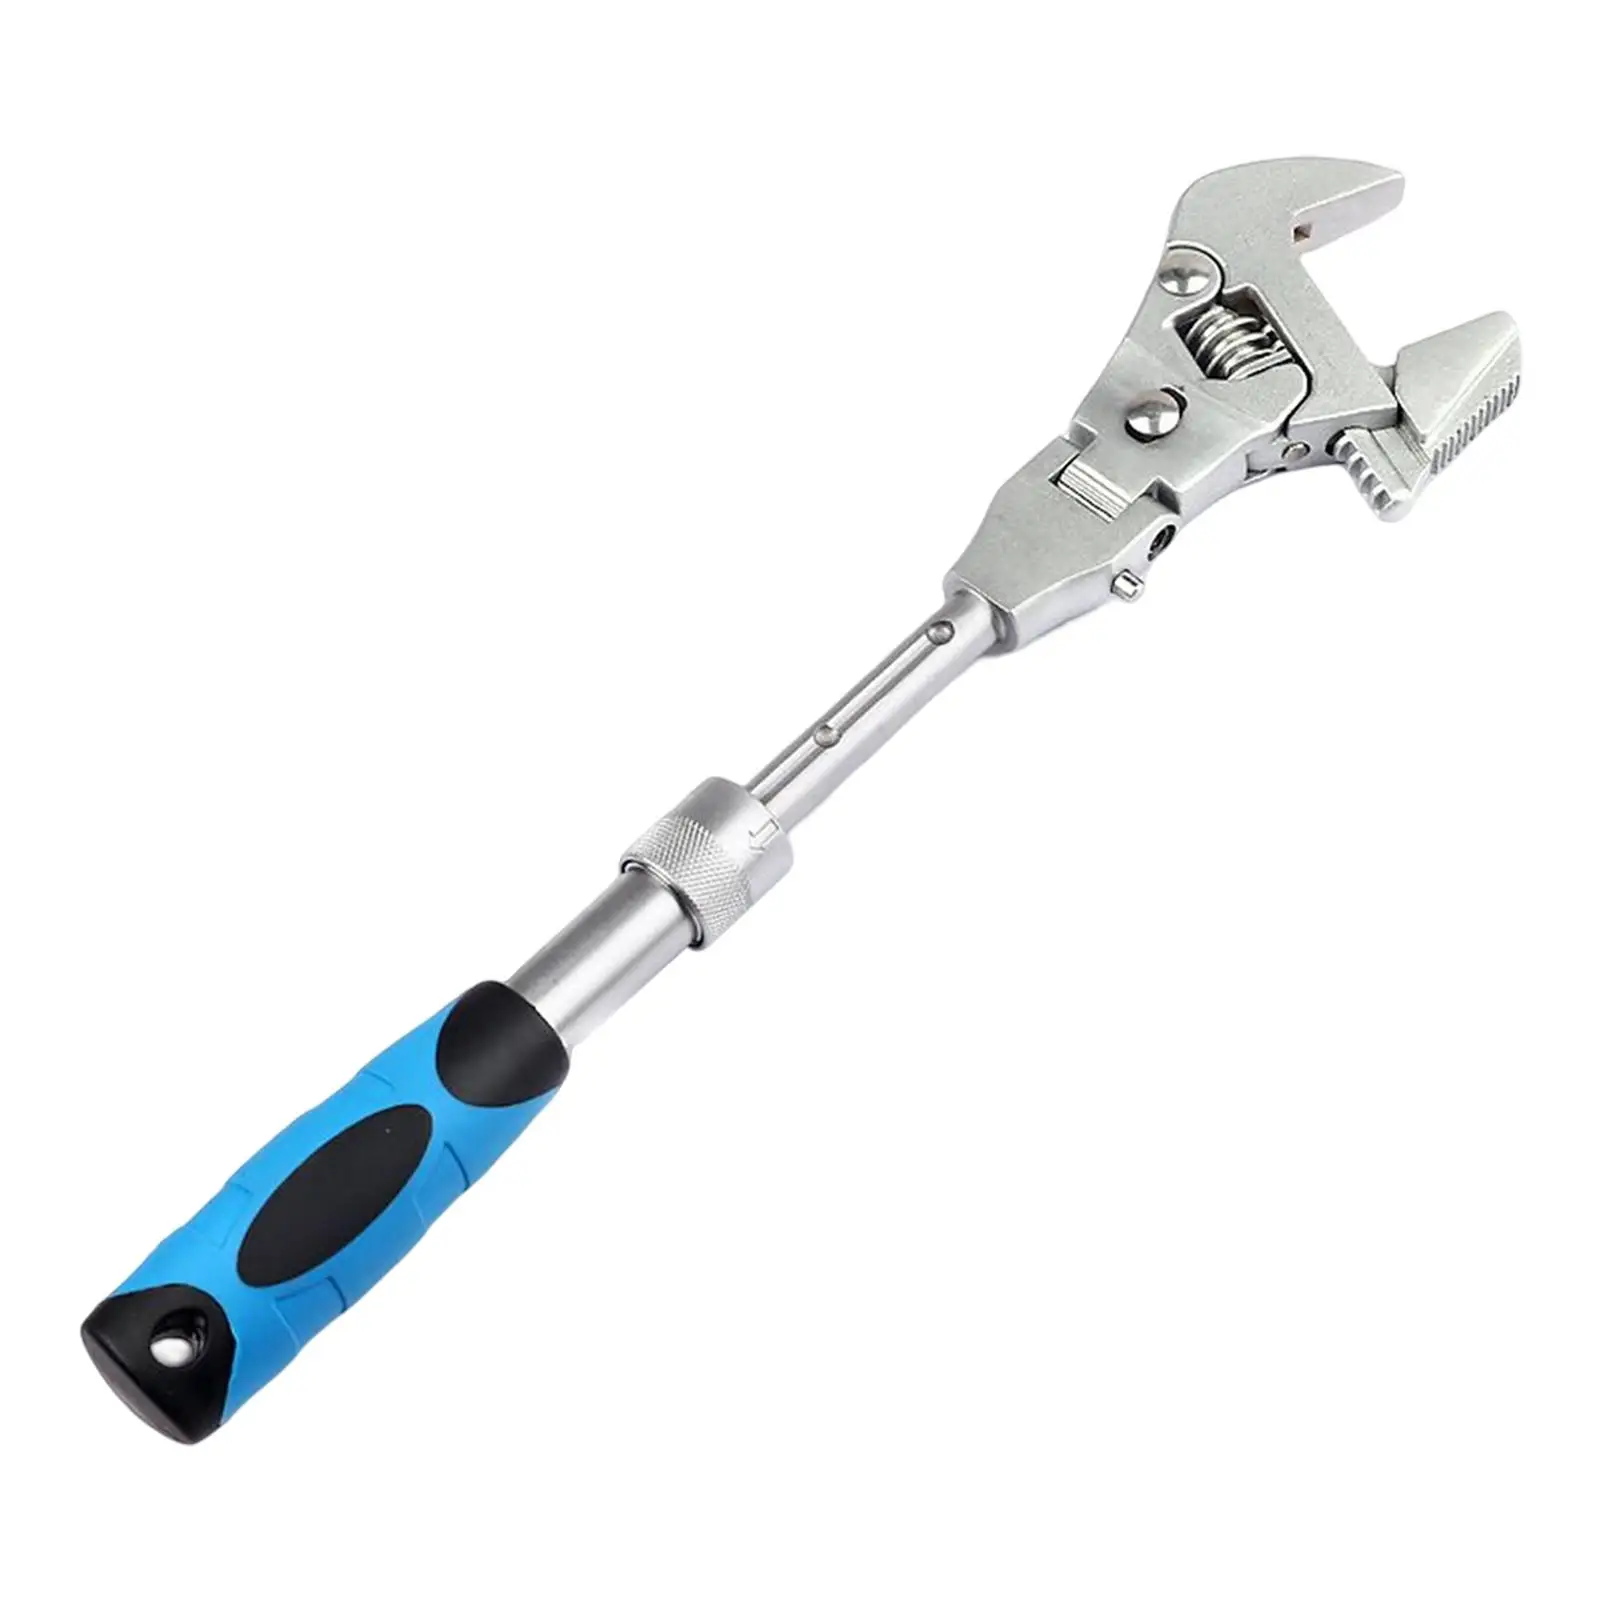 Universal Wrench Flex Ratcheting Wrench 5 in 1 10-Inch DIY Tool Folding Handle Universal Durable Ratchet Wrench for Cell Phone